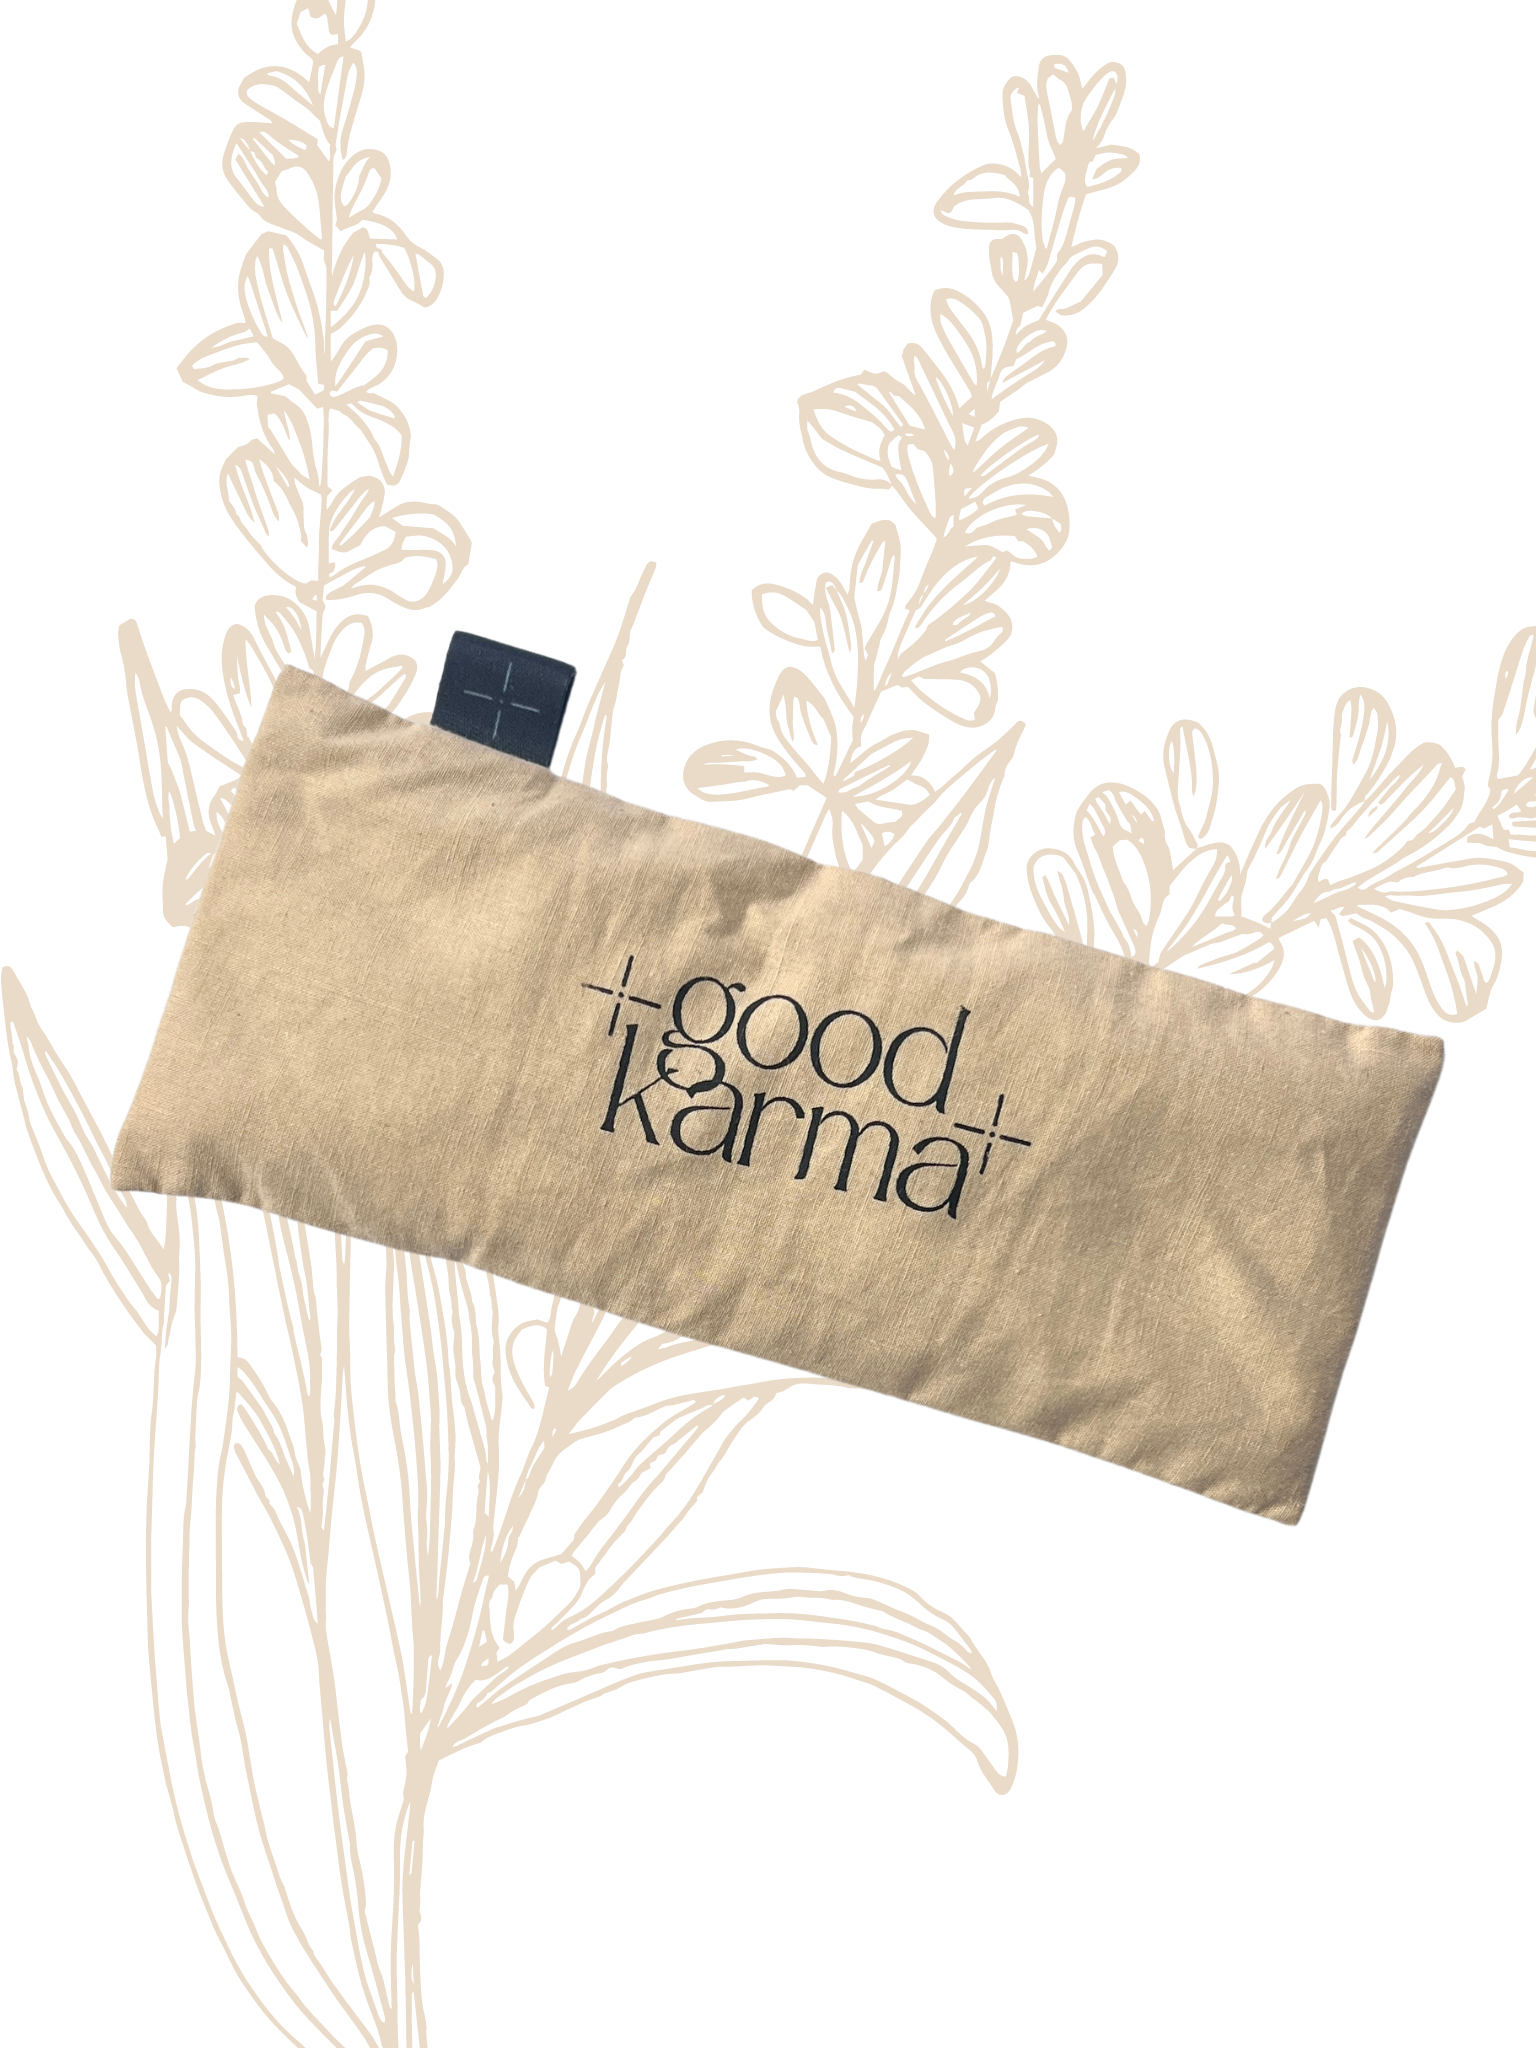 Good Karma organic flax and lavender eye pillows for meditation and relaxation beige color Eye pillow for yoga and meditation